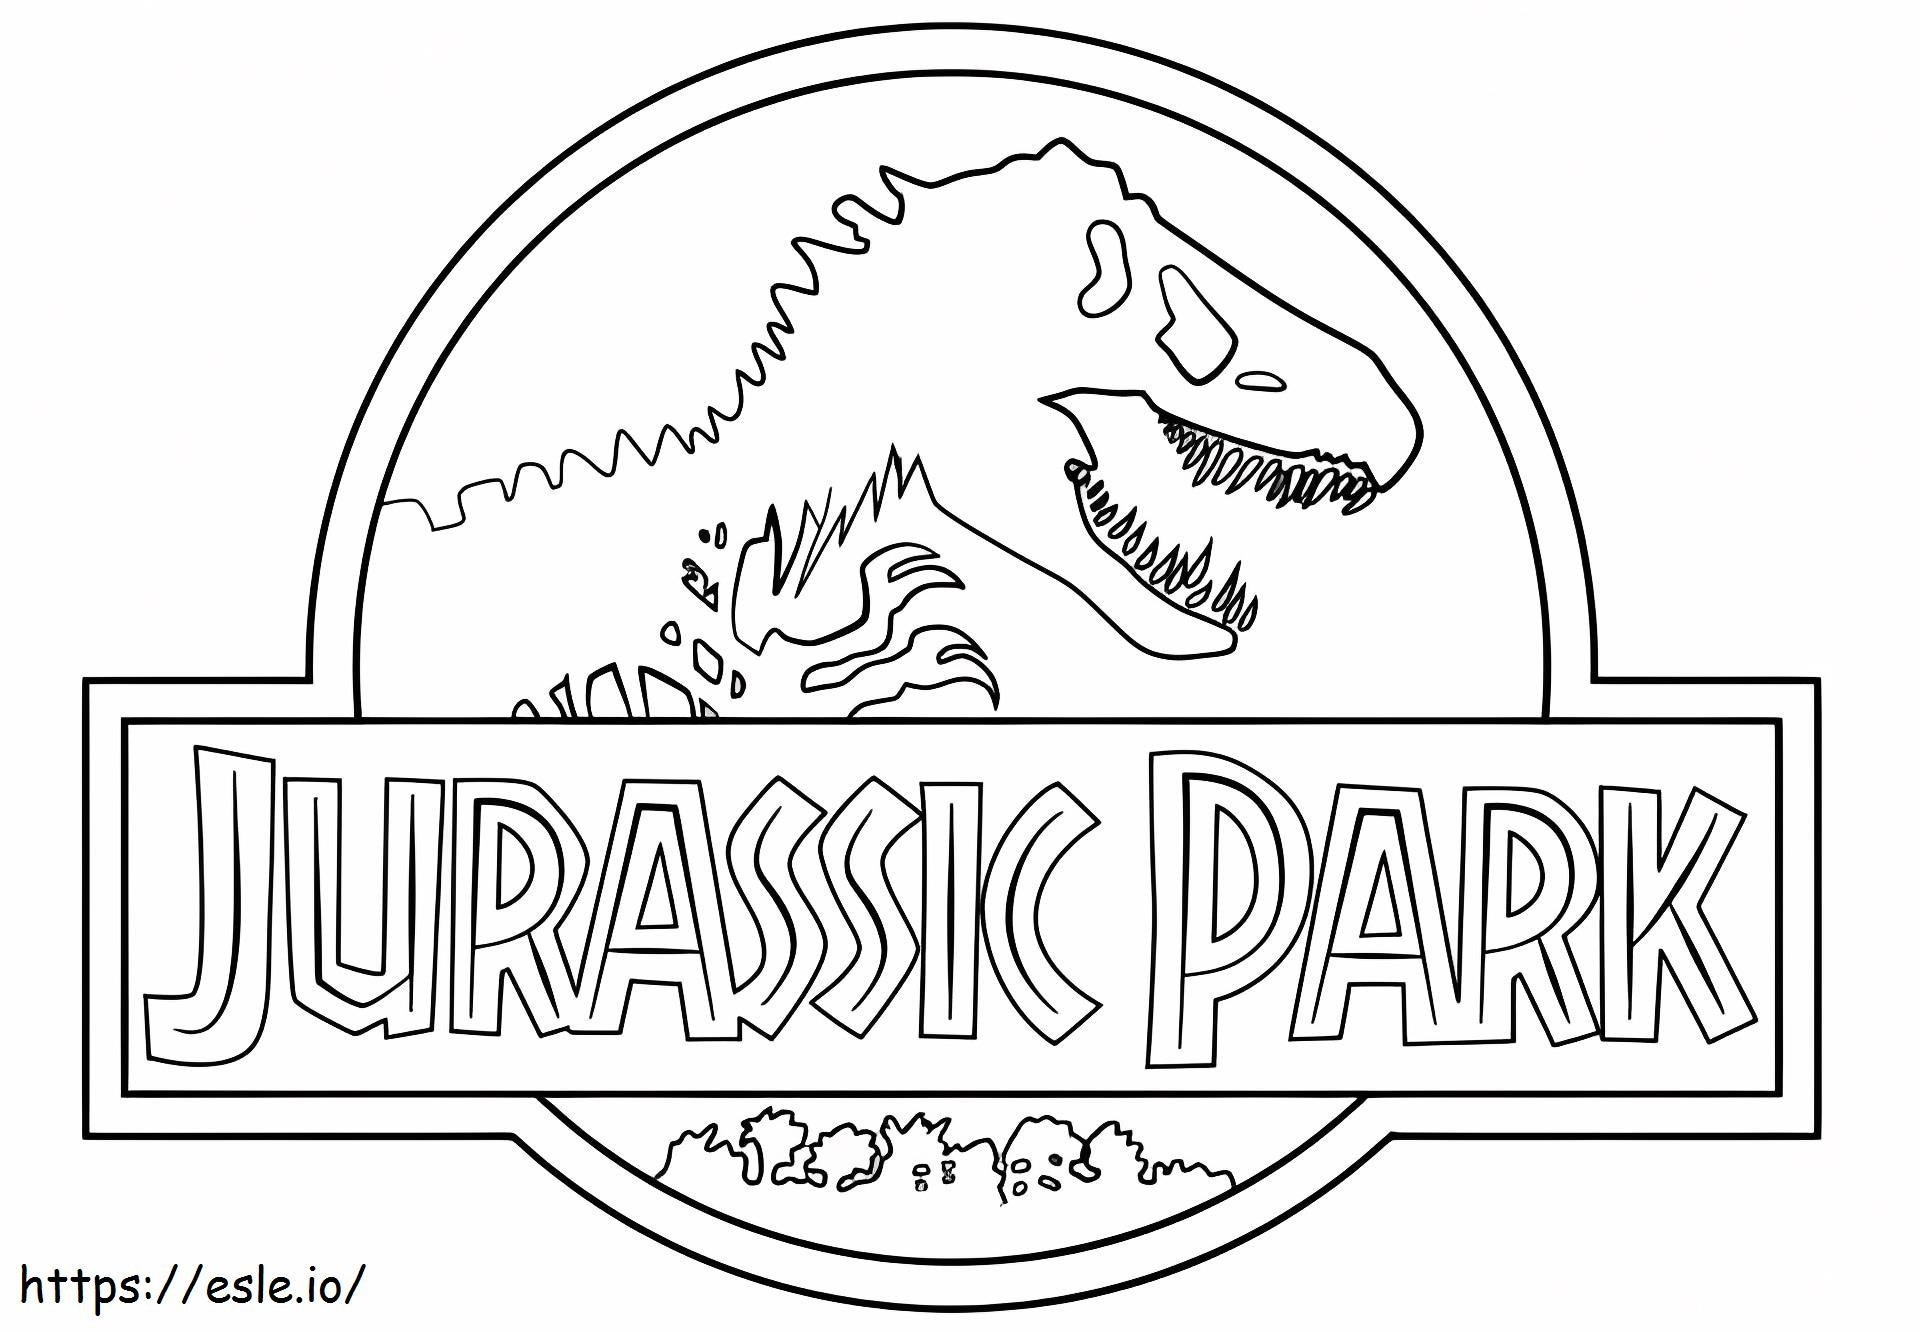 Jurassic Park Logo coloring page